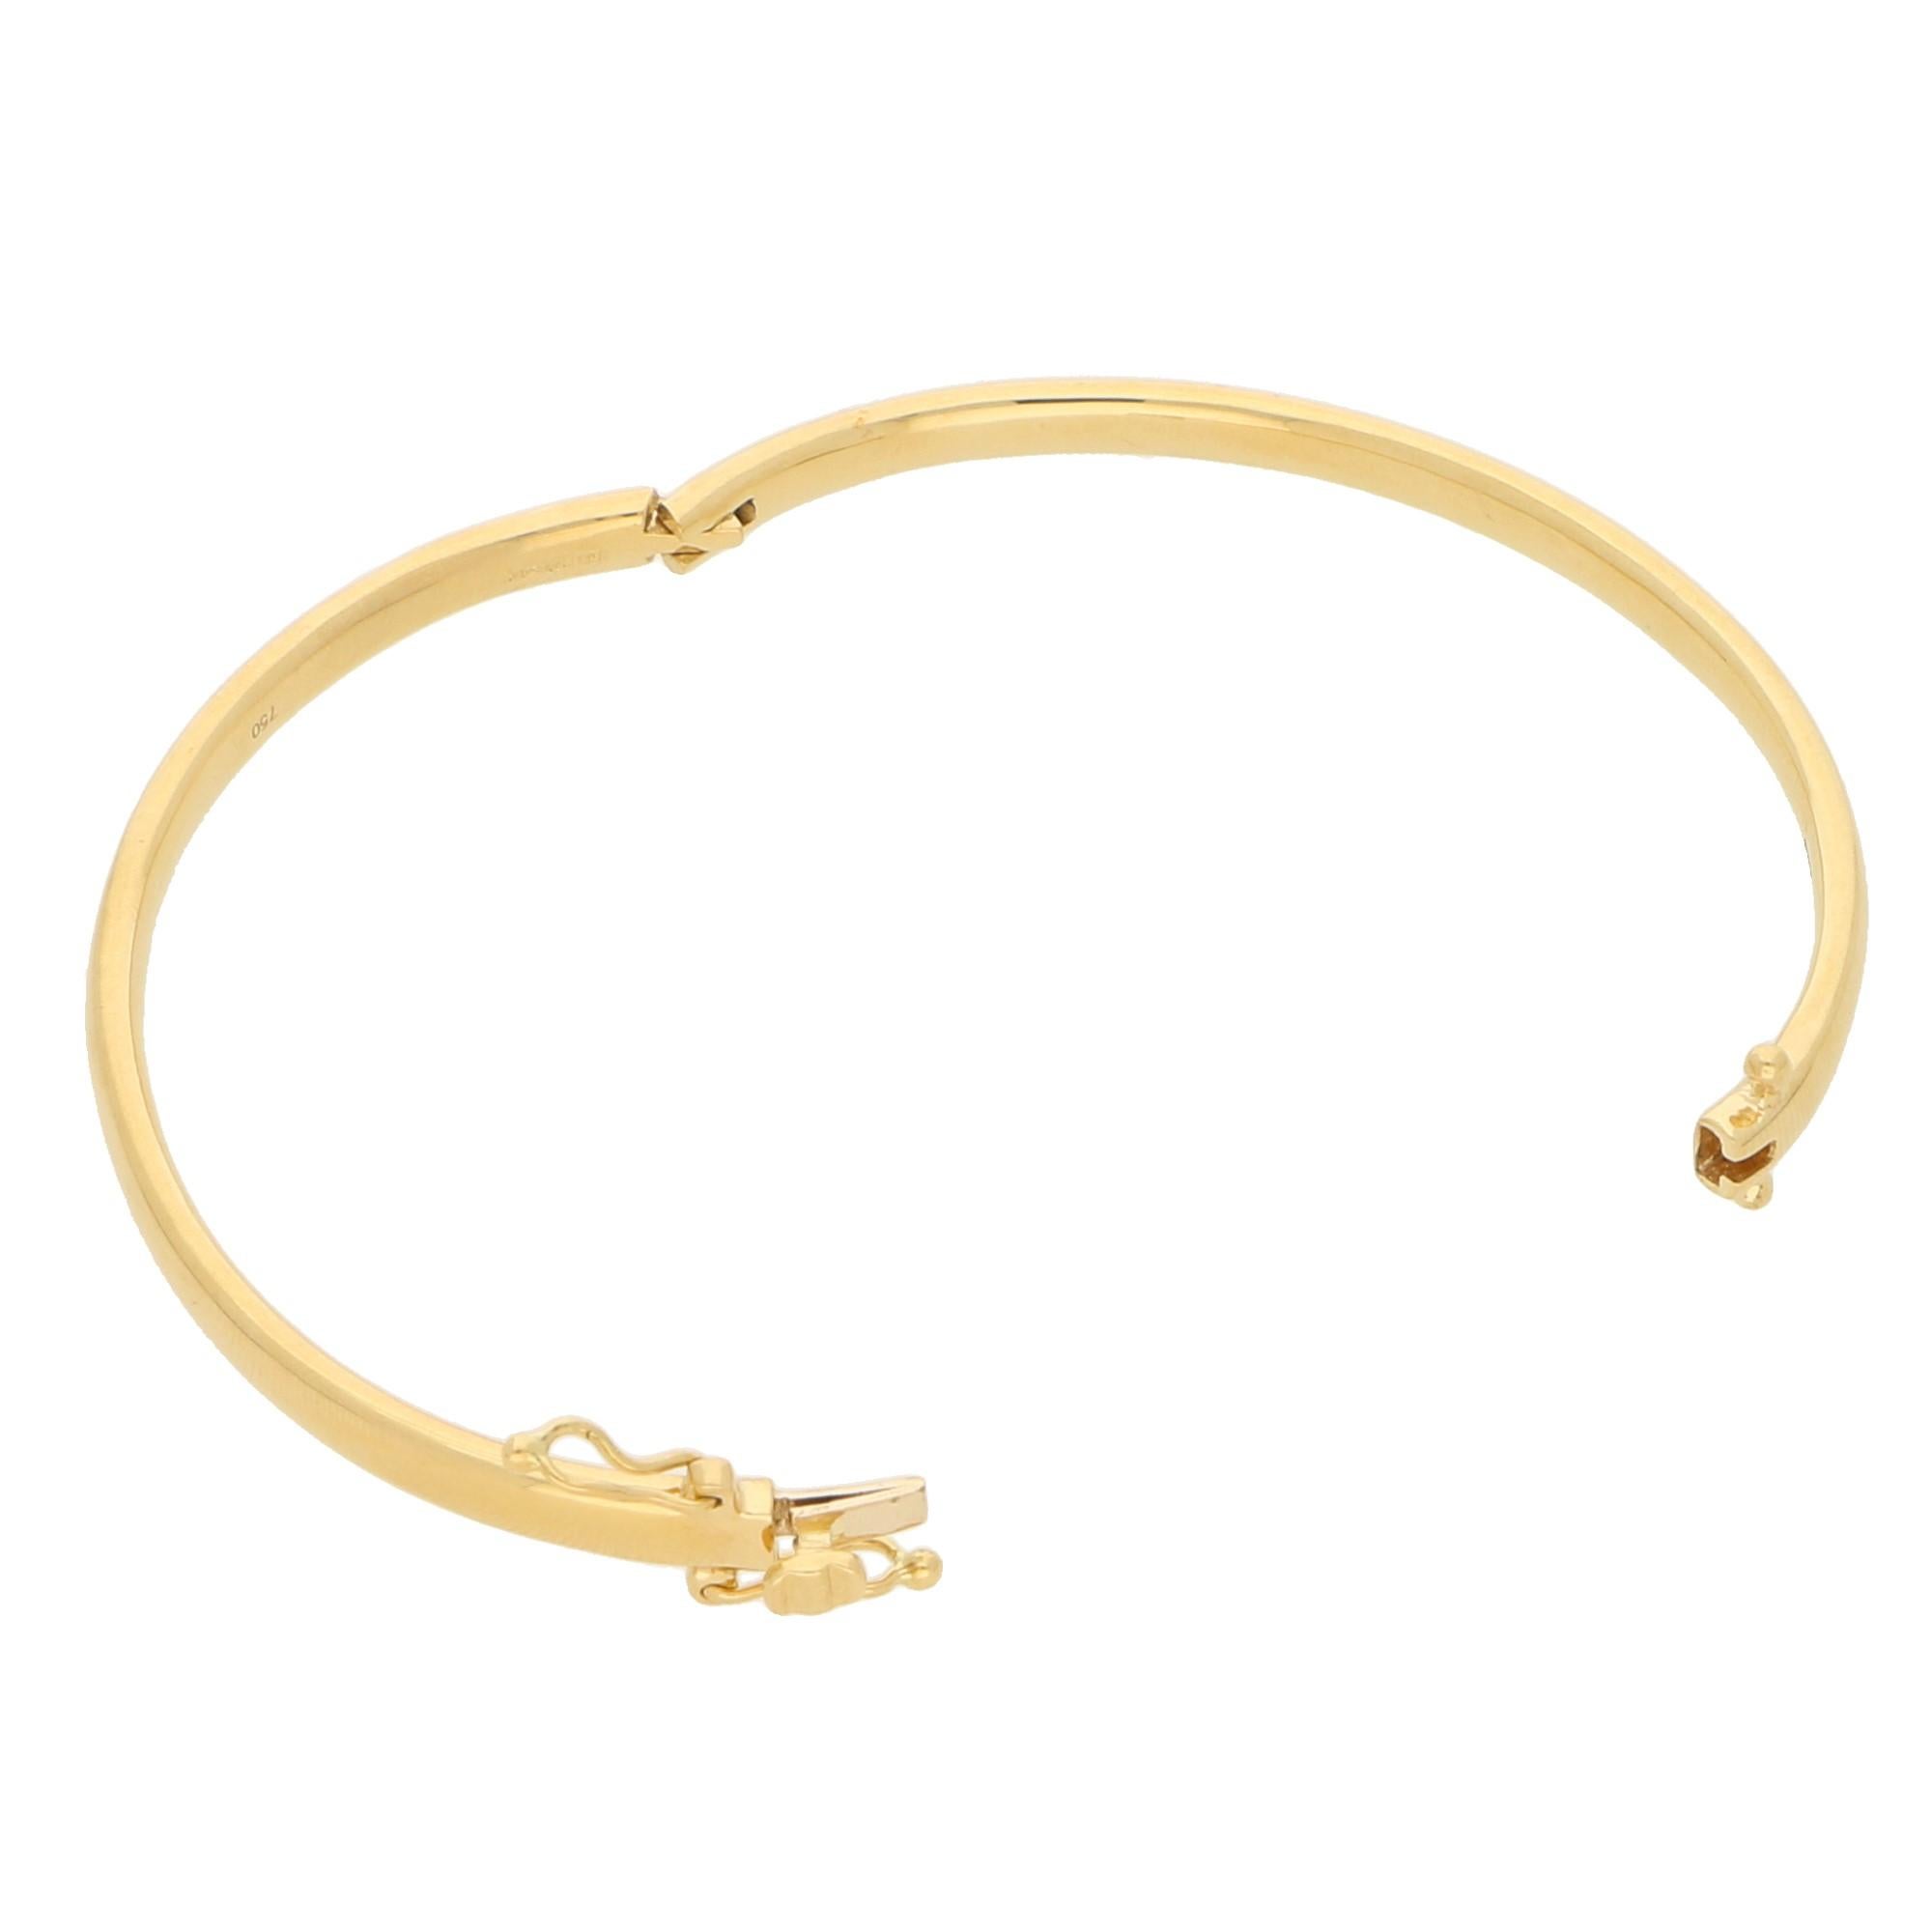 Modern Solid 18 Karat Yellow Gold Hinged Bangle with Safety Catch